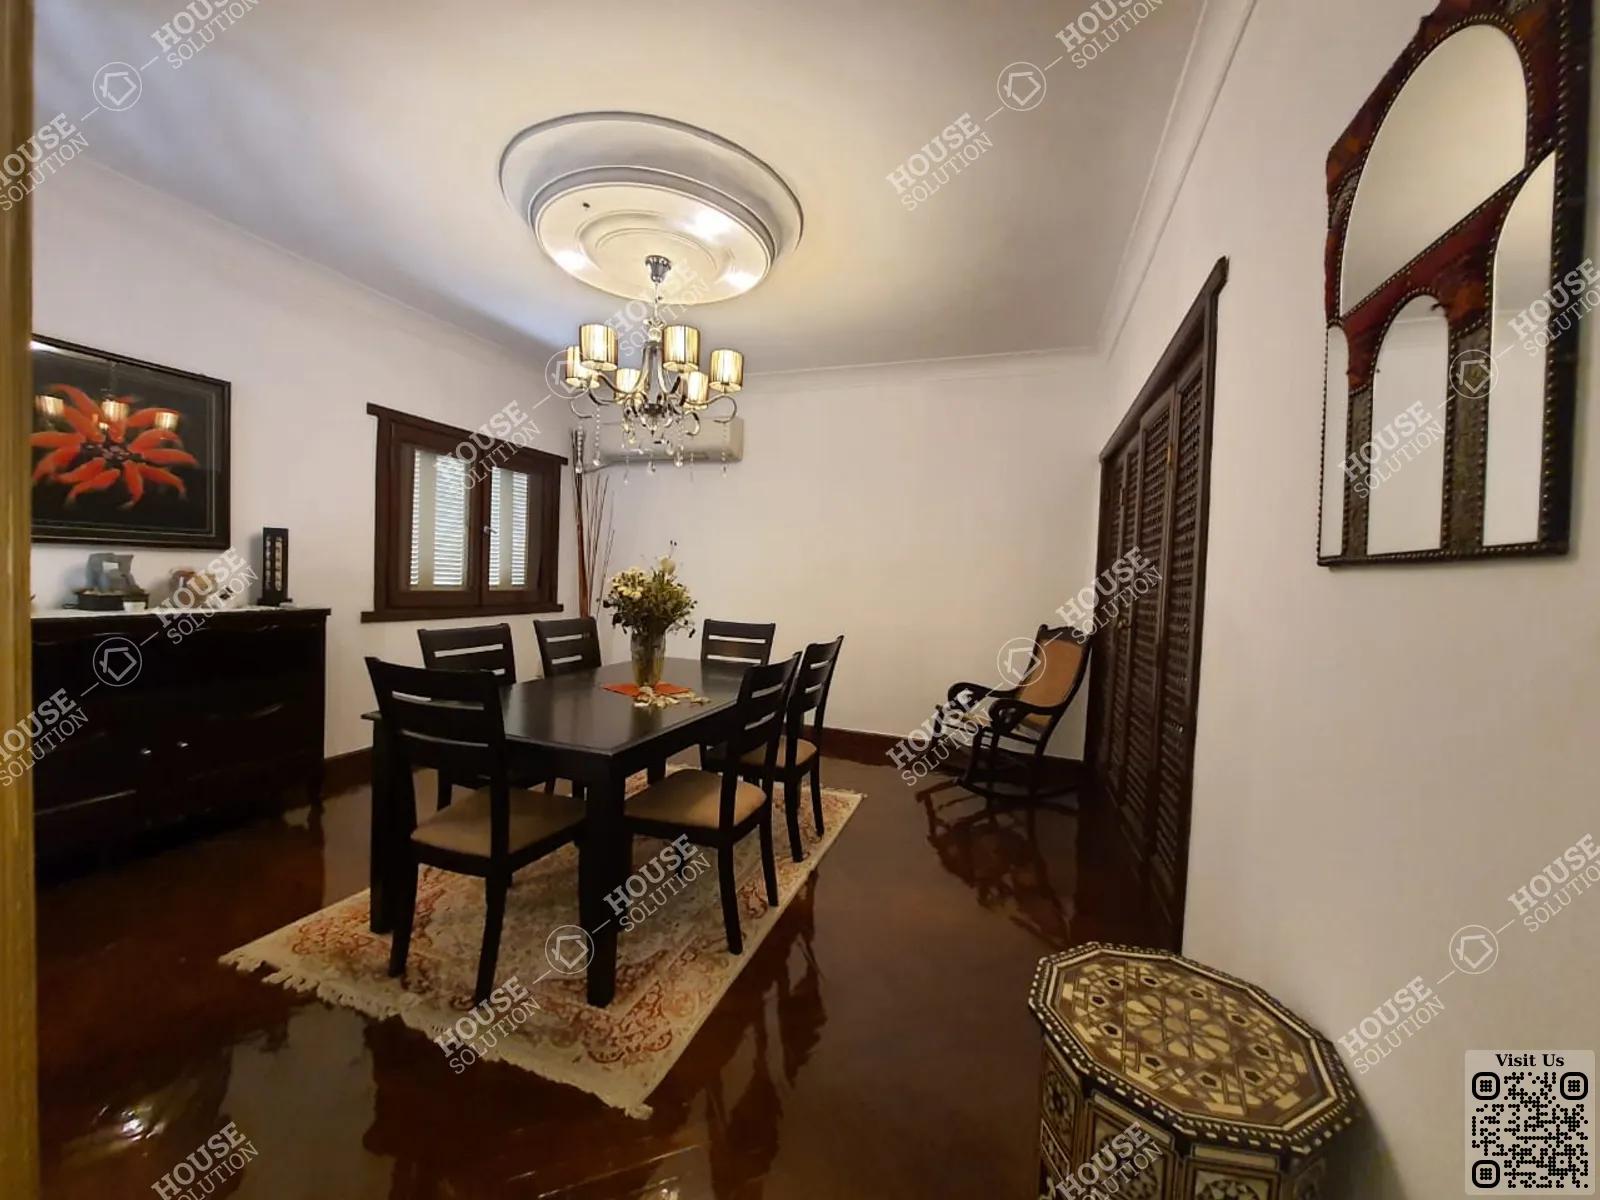 DINING AREA @ Apartments For Rent In Maadi Maadi Sarayat Area: 180 m² consists of 3 Bedrooms 2 Bathrooms Modern furnished 5 stars #3874-1